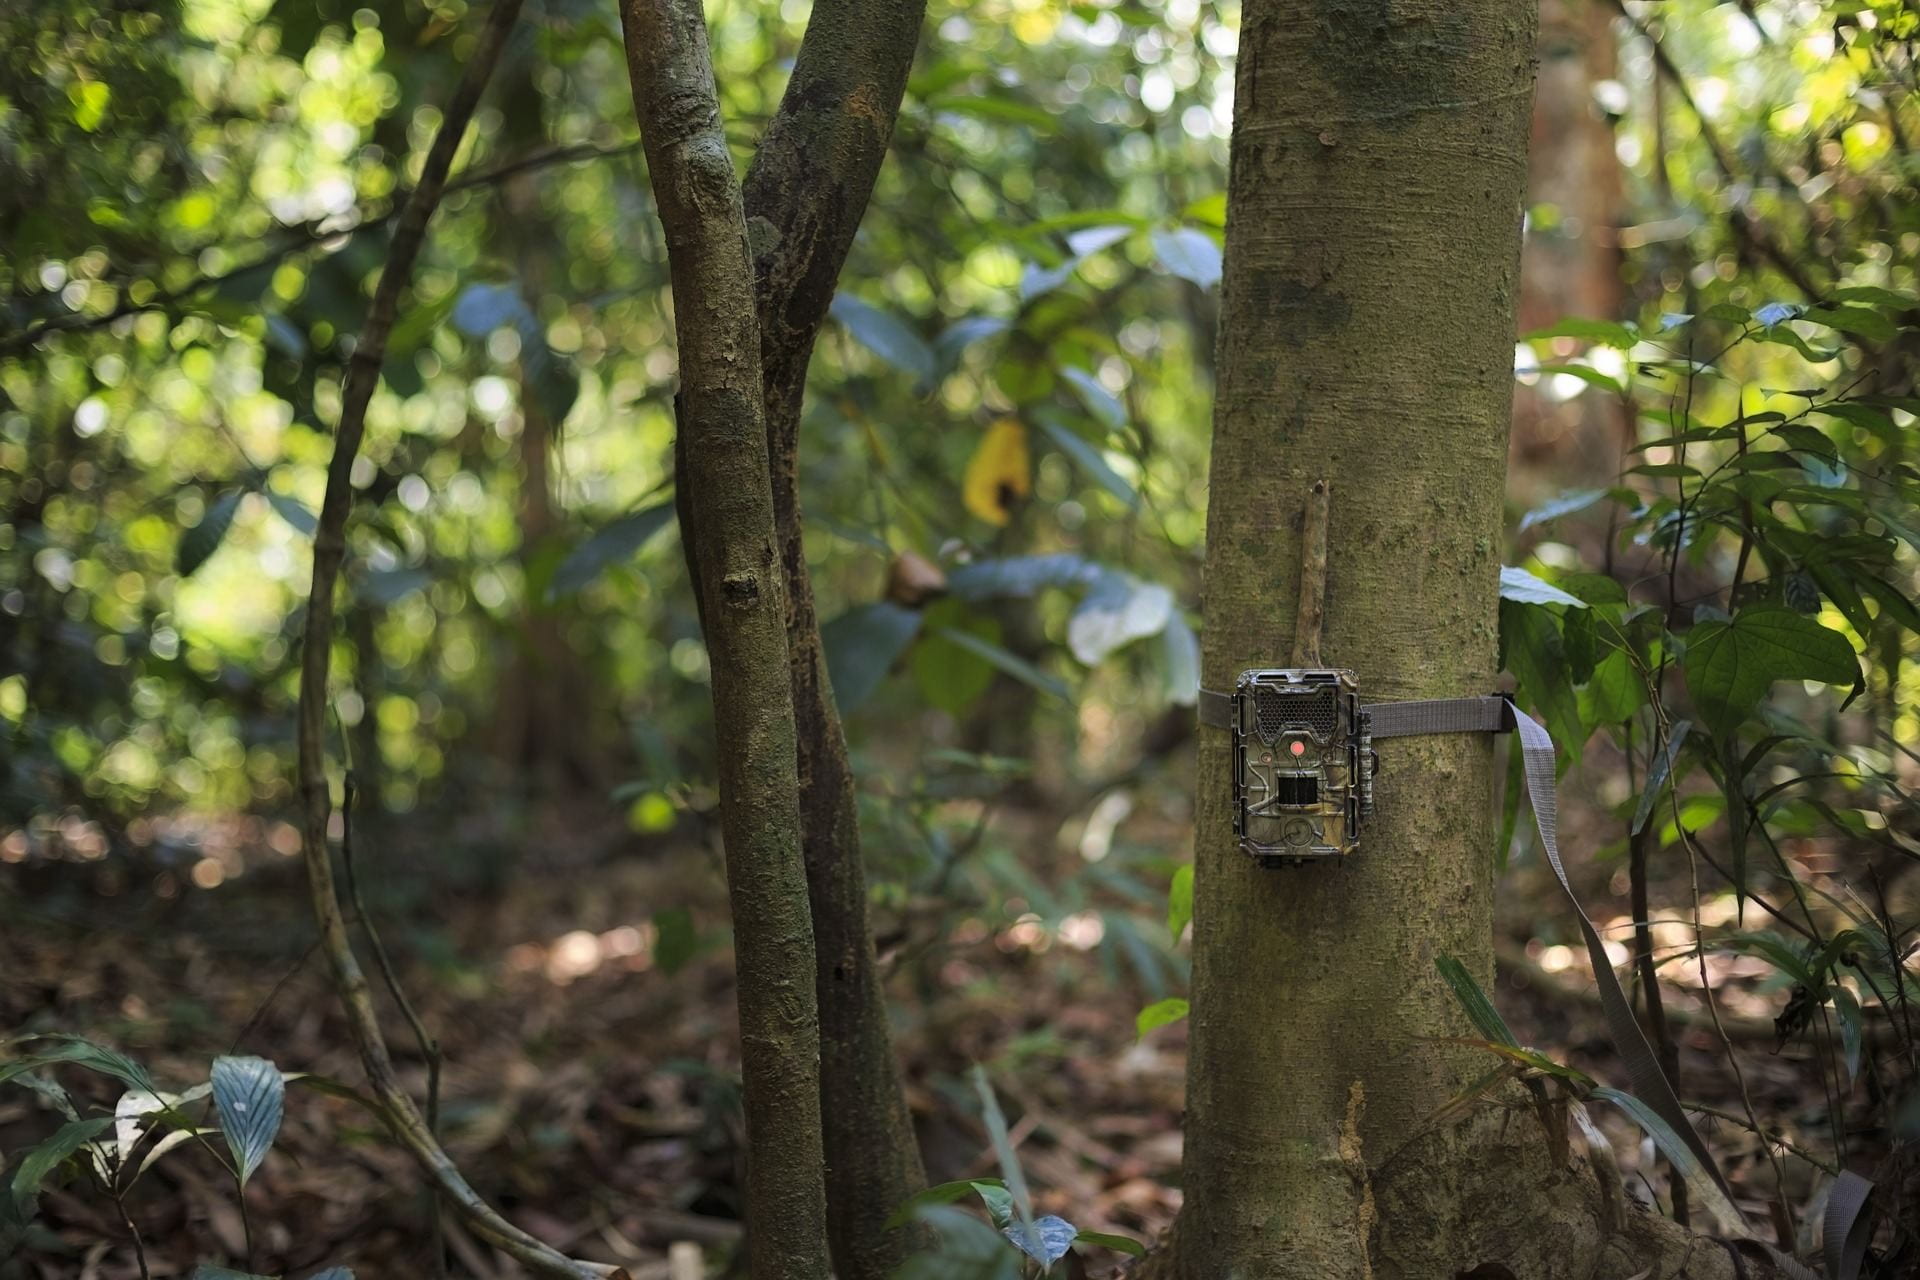 Pictured is a camera trap attached to a tree in a forest. Even using camera traps for observational research on wildlife requires approval from IACUC.